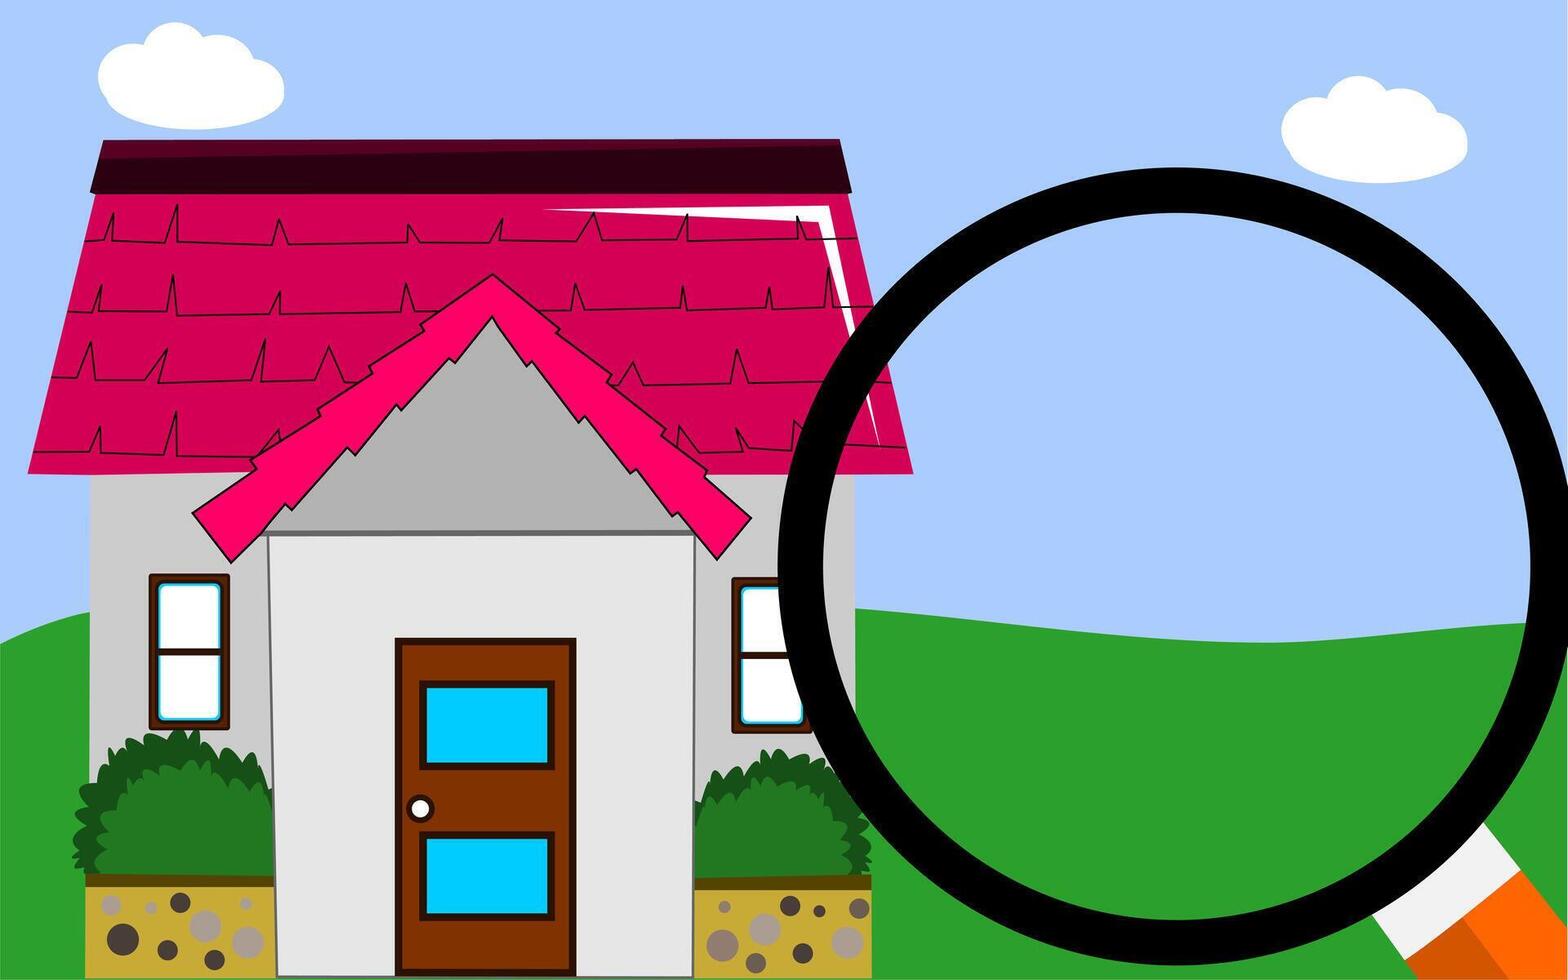 Real estate appraisal, house inspection, mortgage loan, home loan, home appraisal, magnifying glass to see house details. vector